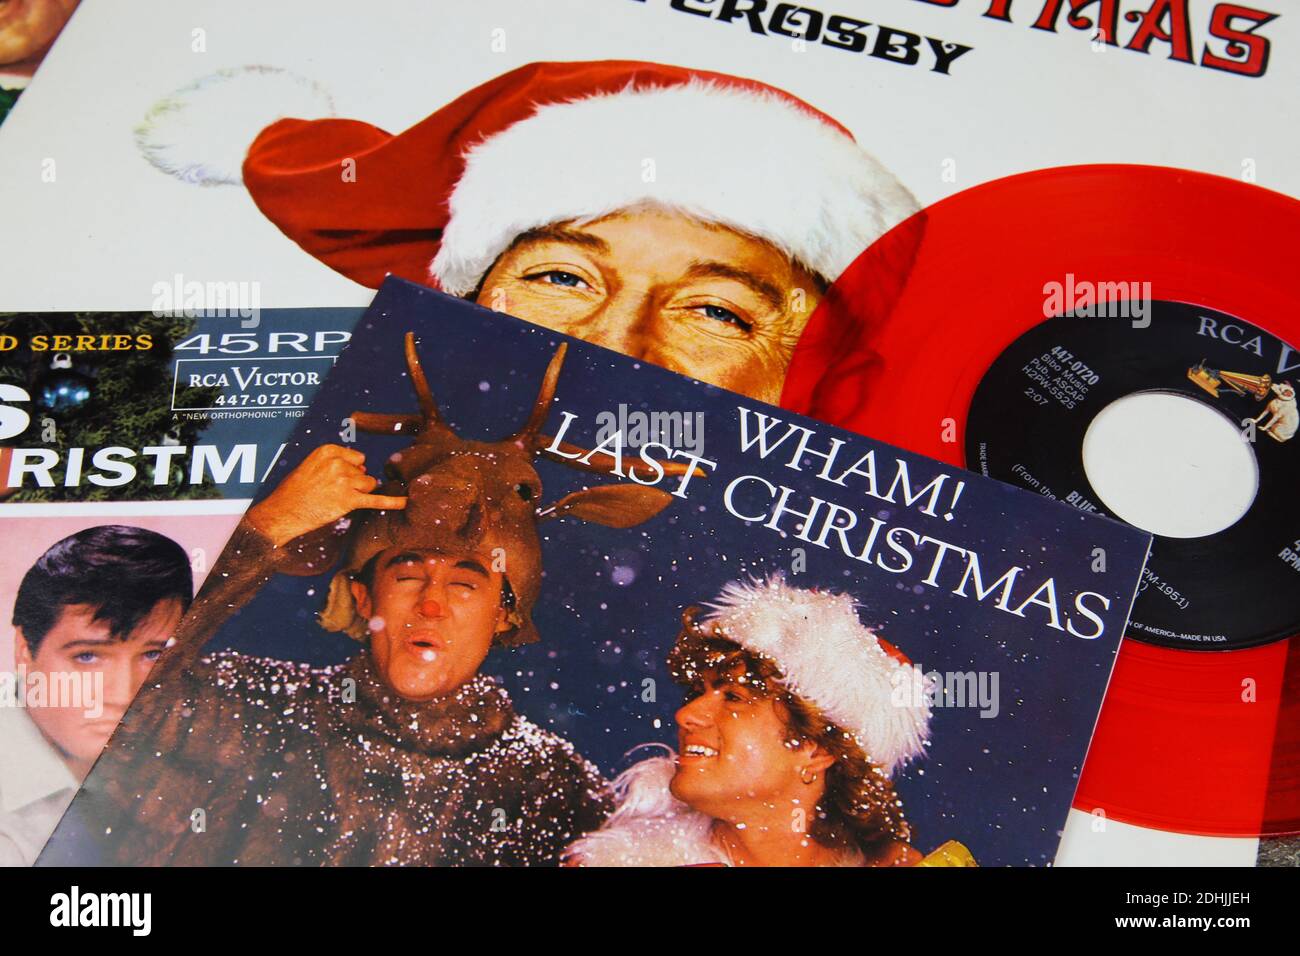 accelerator overalt basketball Viersen, Germany - December 9. 2020: Close up of vintage vinyl record cover  singles with famous christmas songs (focus on Wham last christmas cover  Stock Photo - Alamy